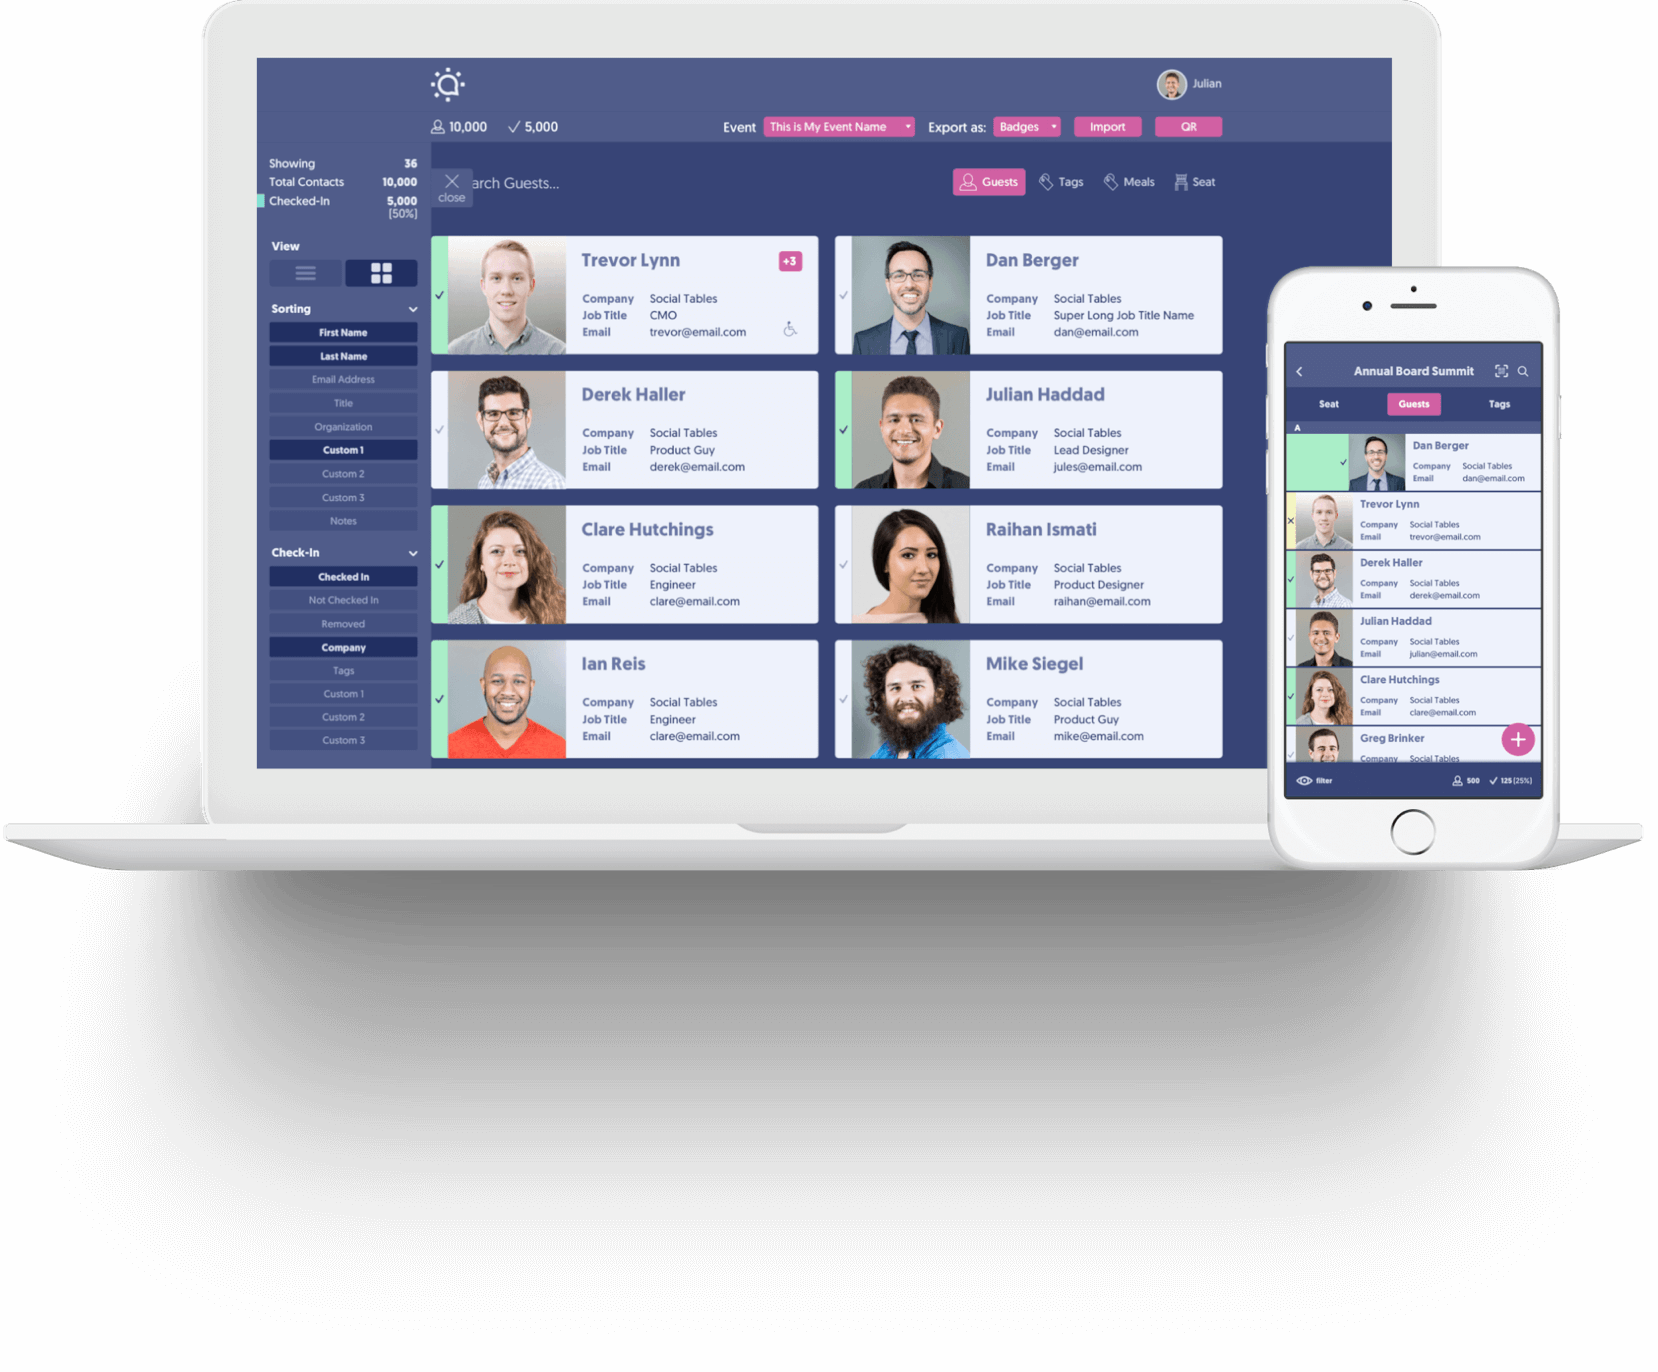 Guest management tools in the Social Tables platform